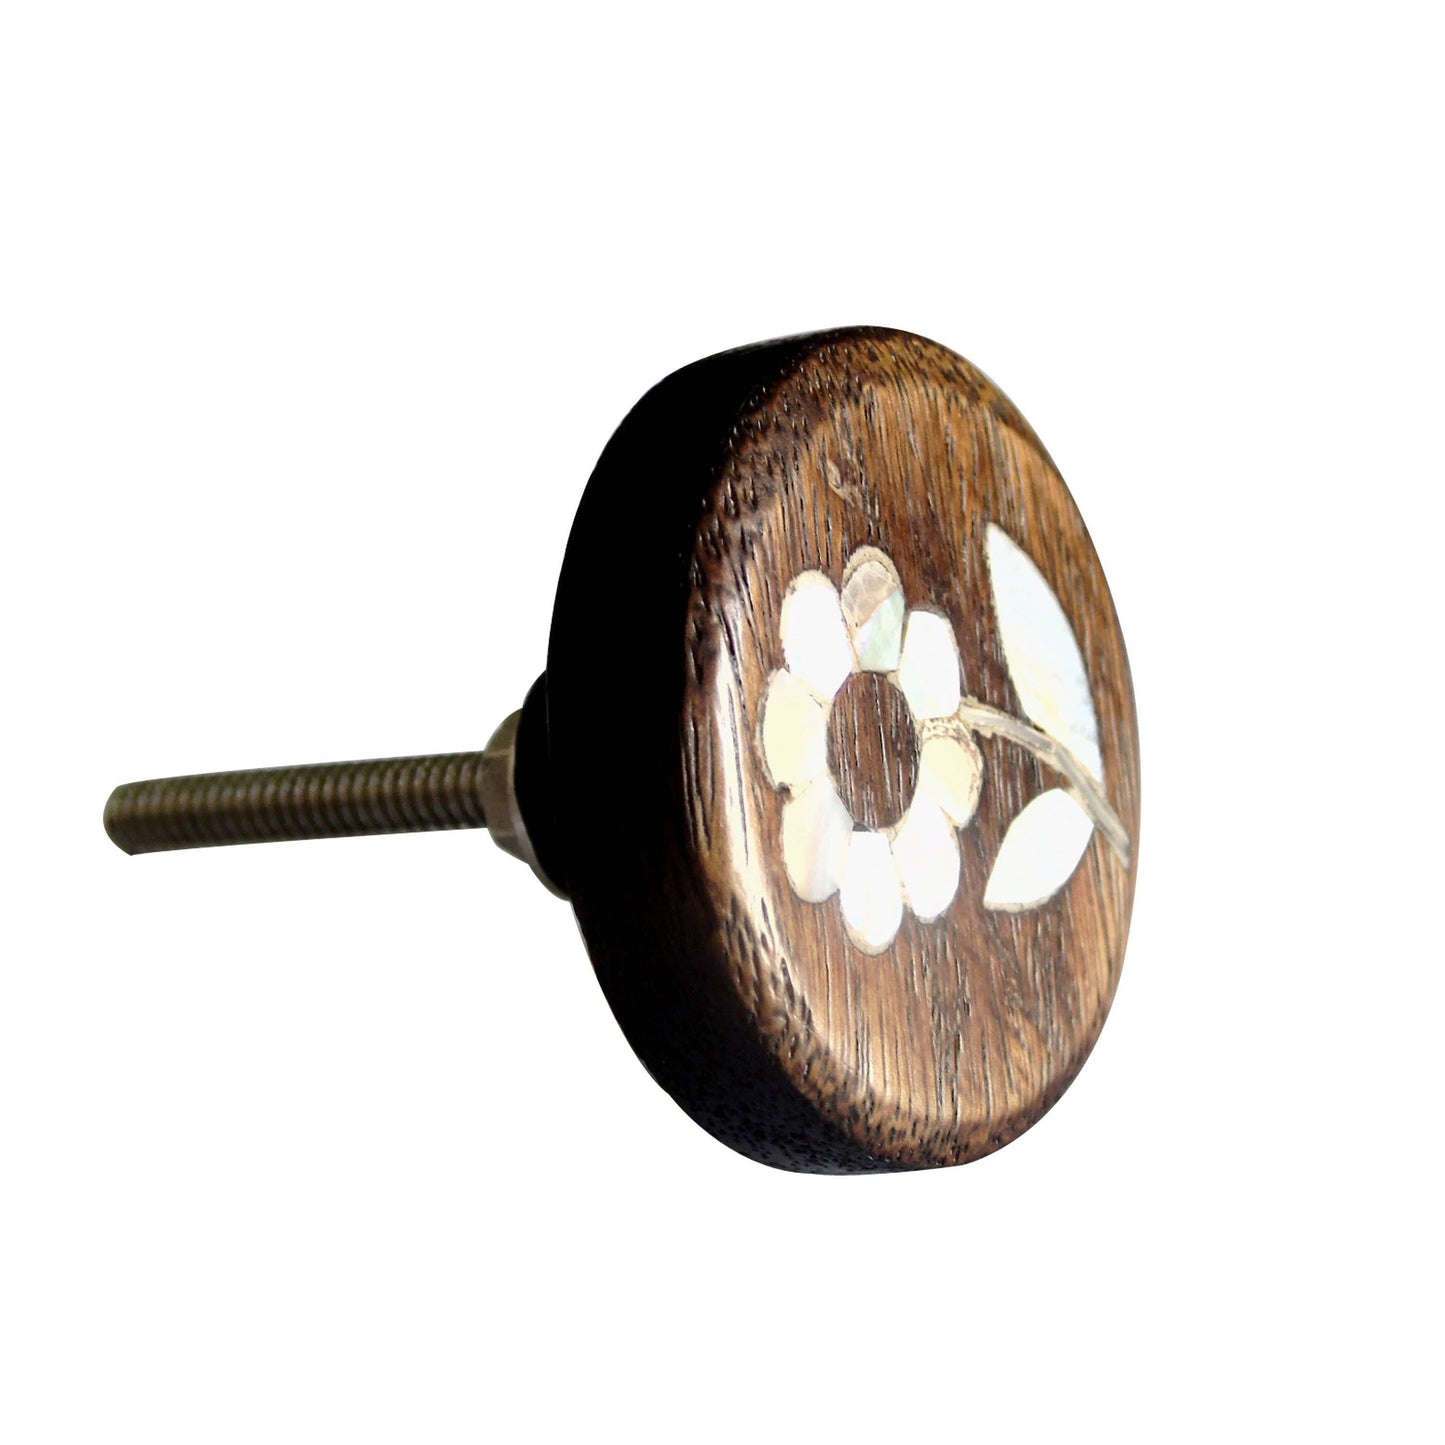 Daisy Mother of Pearl Wooden Knob